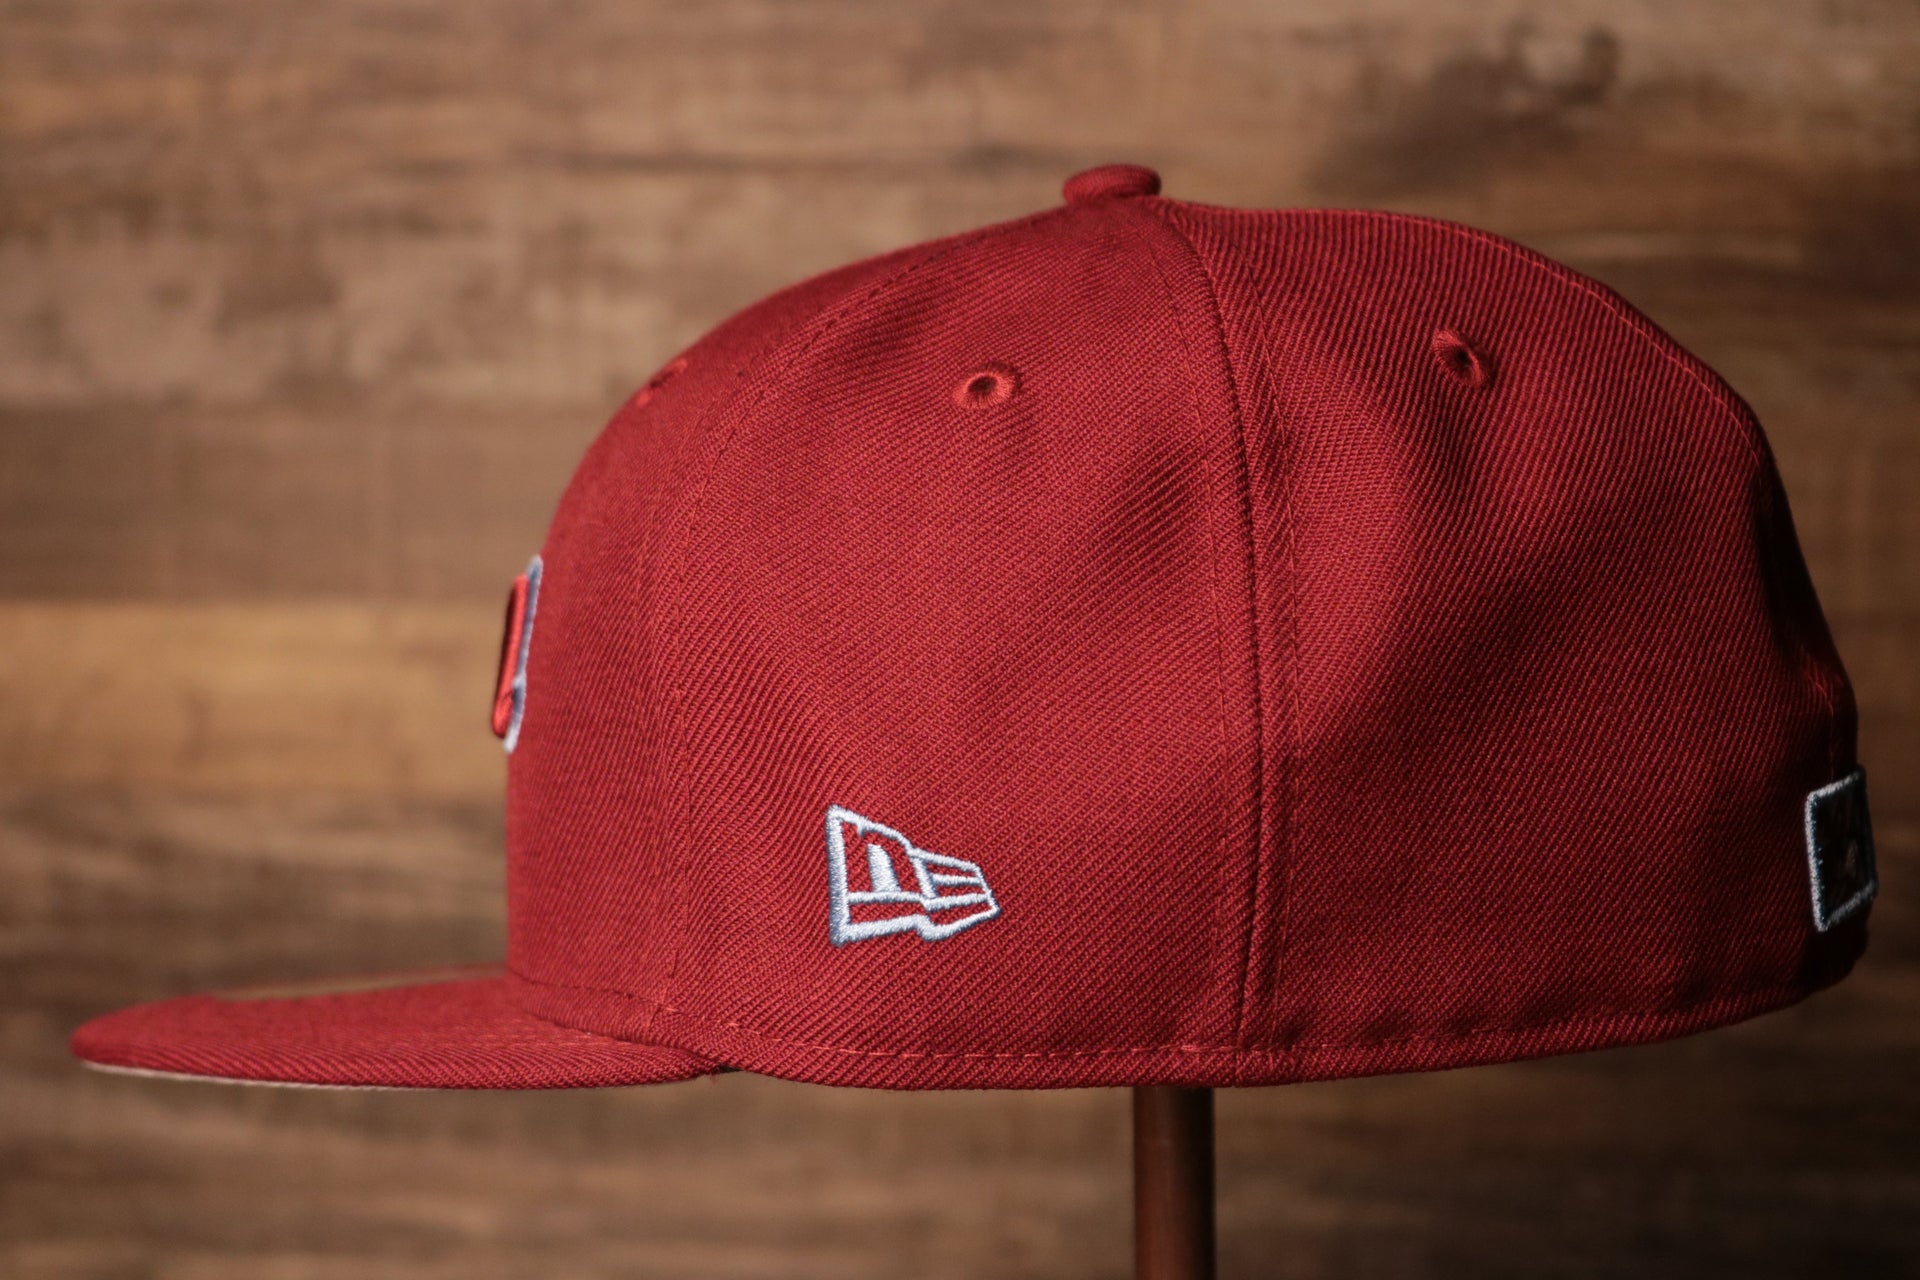 Grey Bottom Fitted Cap | Jawn Burgundy Gray Bottom Fitted Hat the wearers lefy side has the new era logo